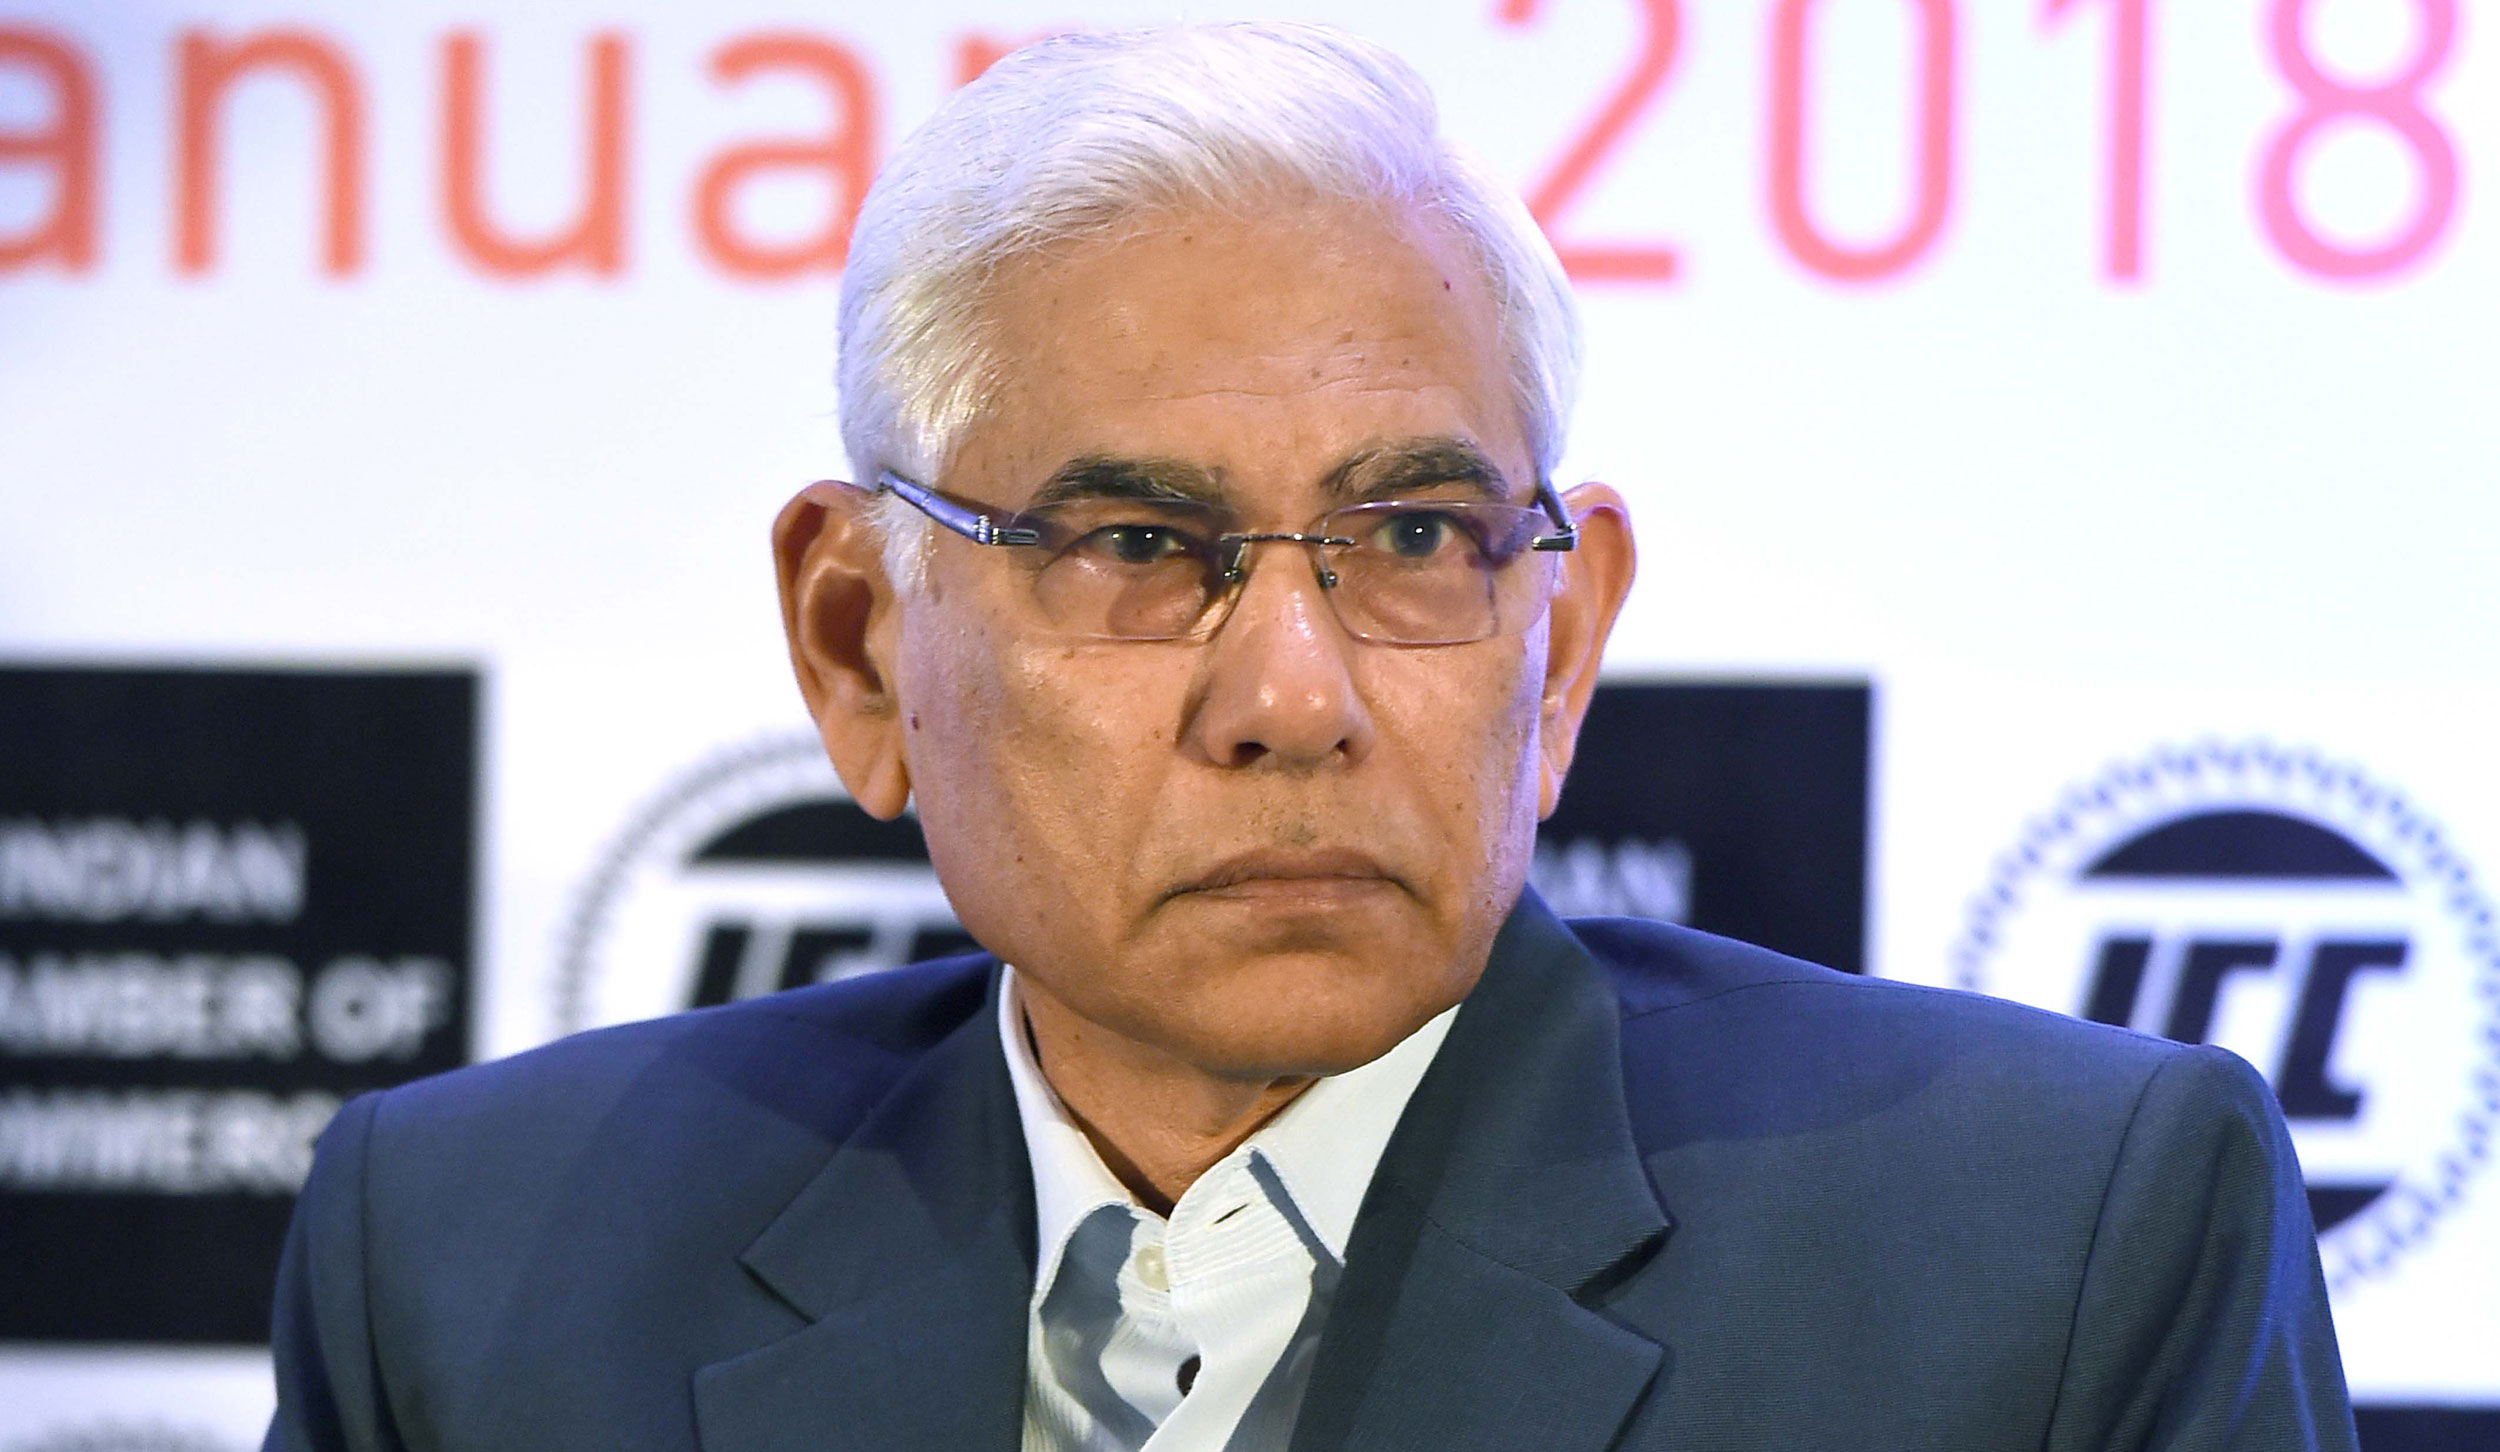 “We are happy that our stand has been vindicated. What PCB termed as Memorandum of Understanding was just a proposal letter,” CoA chief Vinod Rai (in picture) said.

